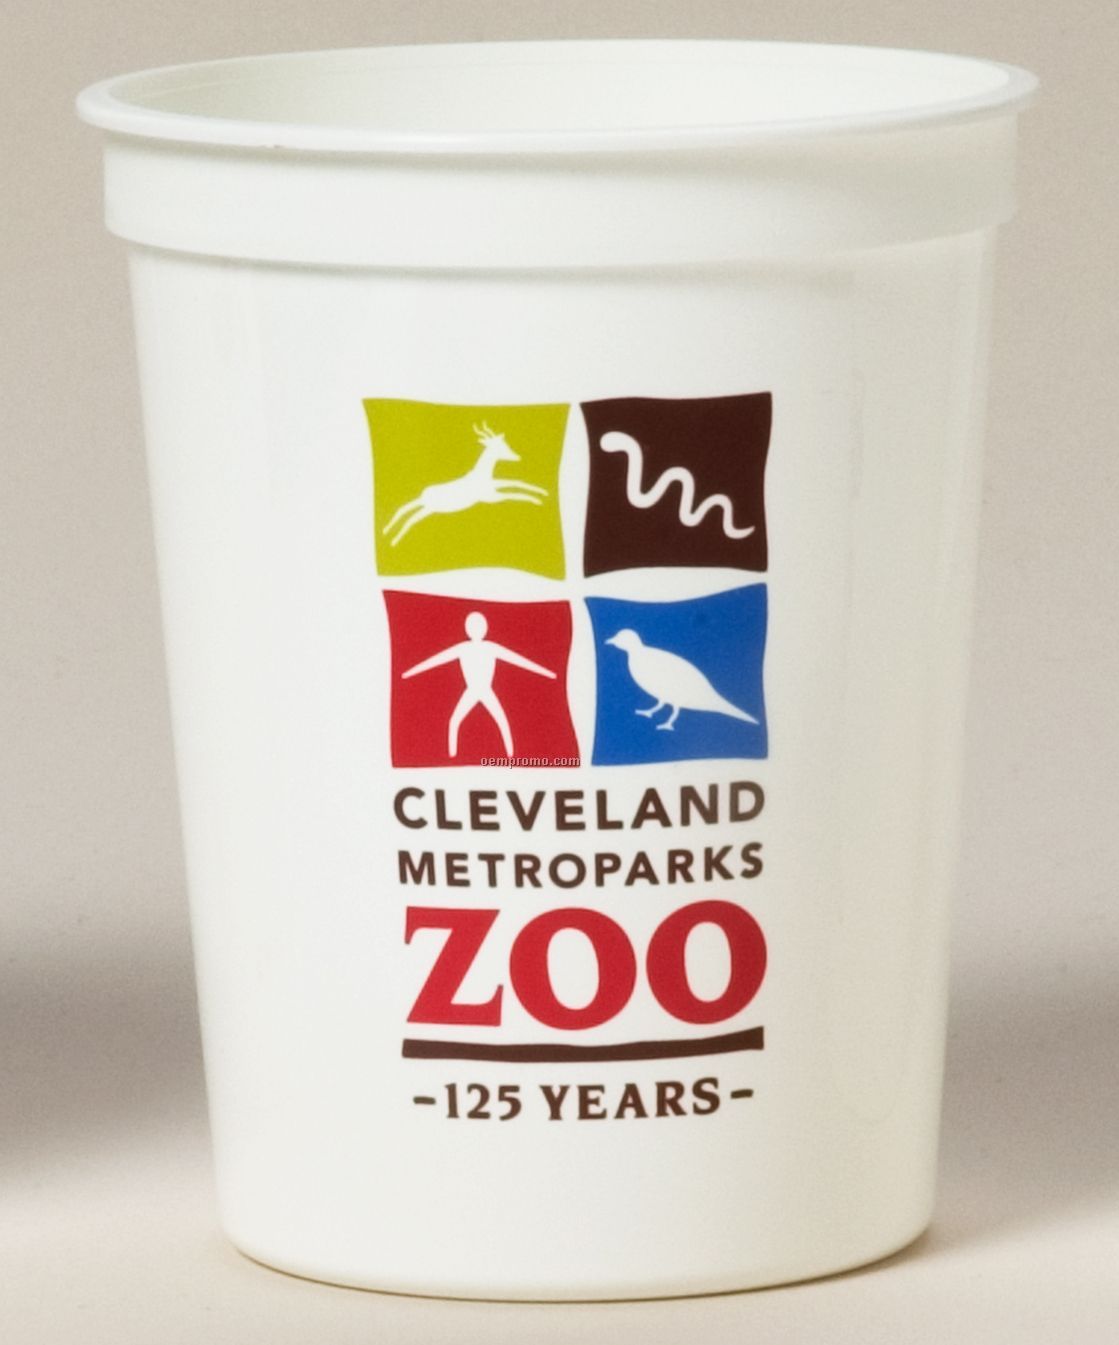 16 Oz. Smooth/Fluted White Stadium Cup (7 Color Offset Imprint)